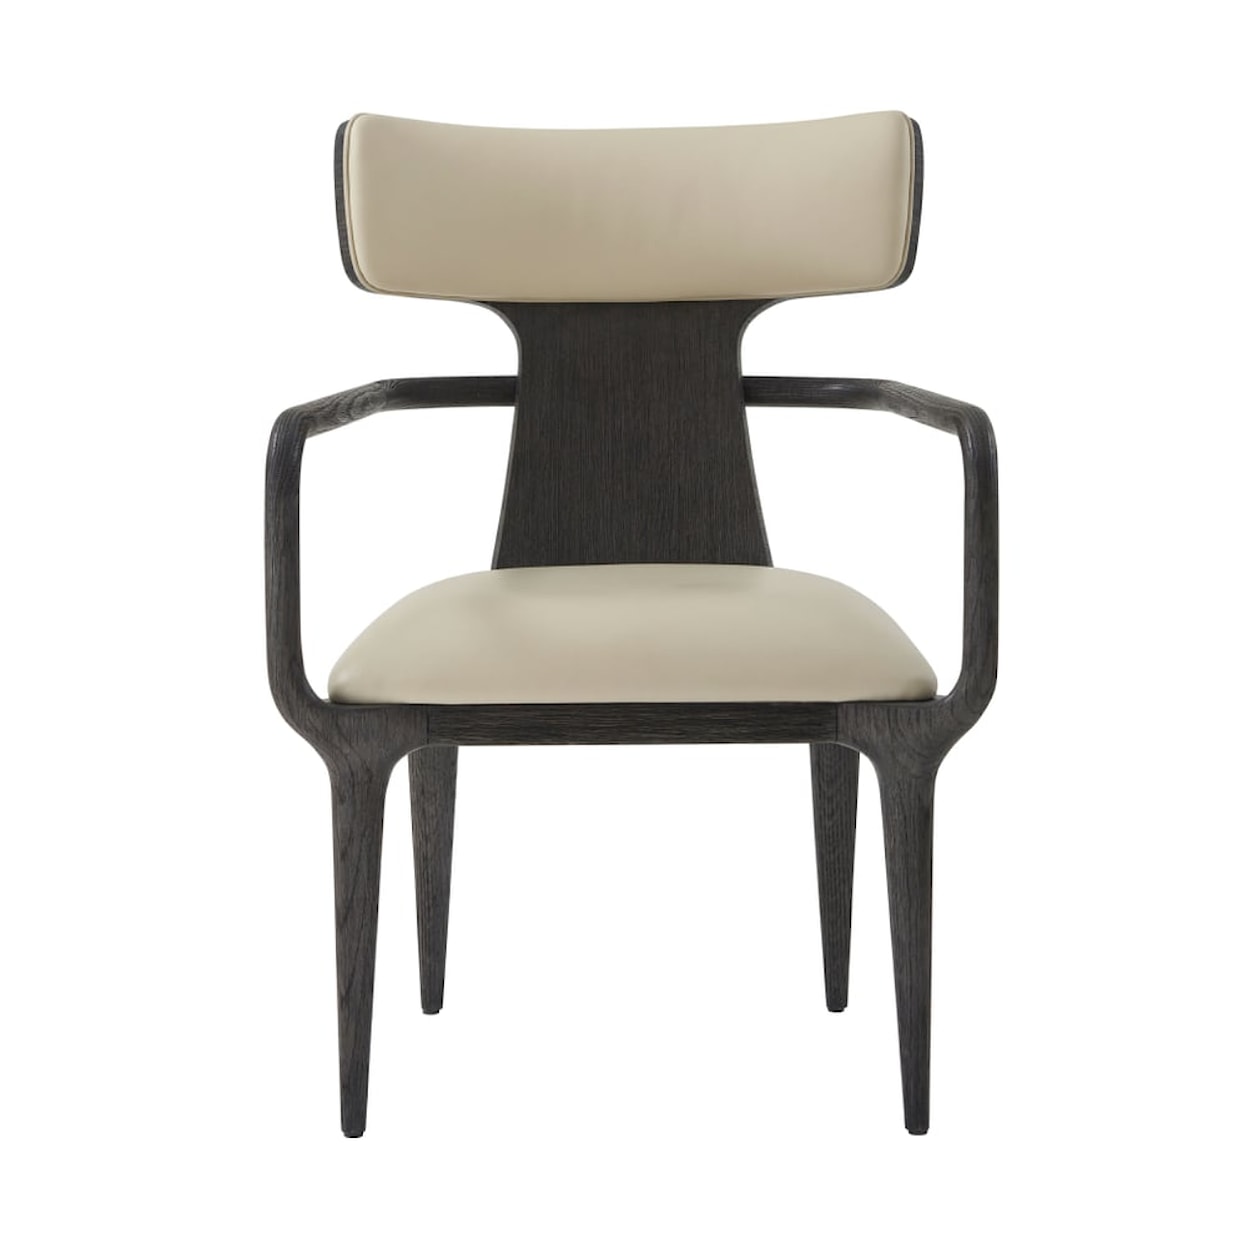 Theodore Alexander Repose Upholstered Dining Arm Chair